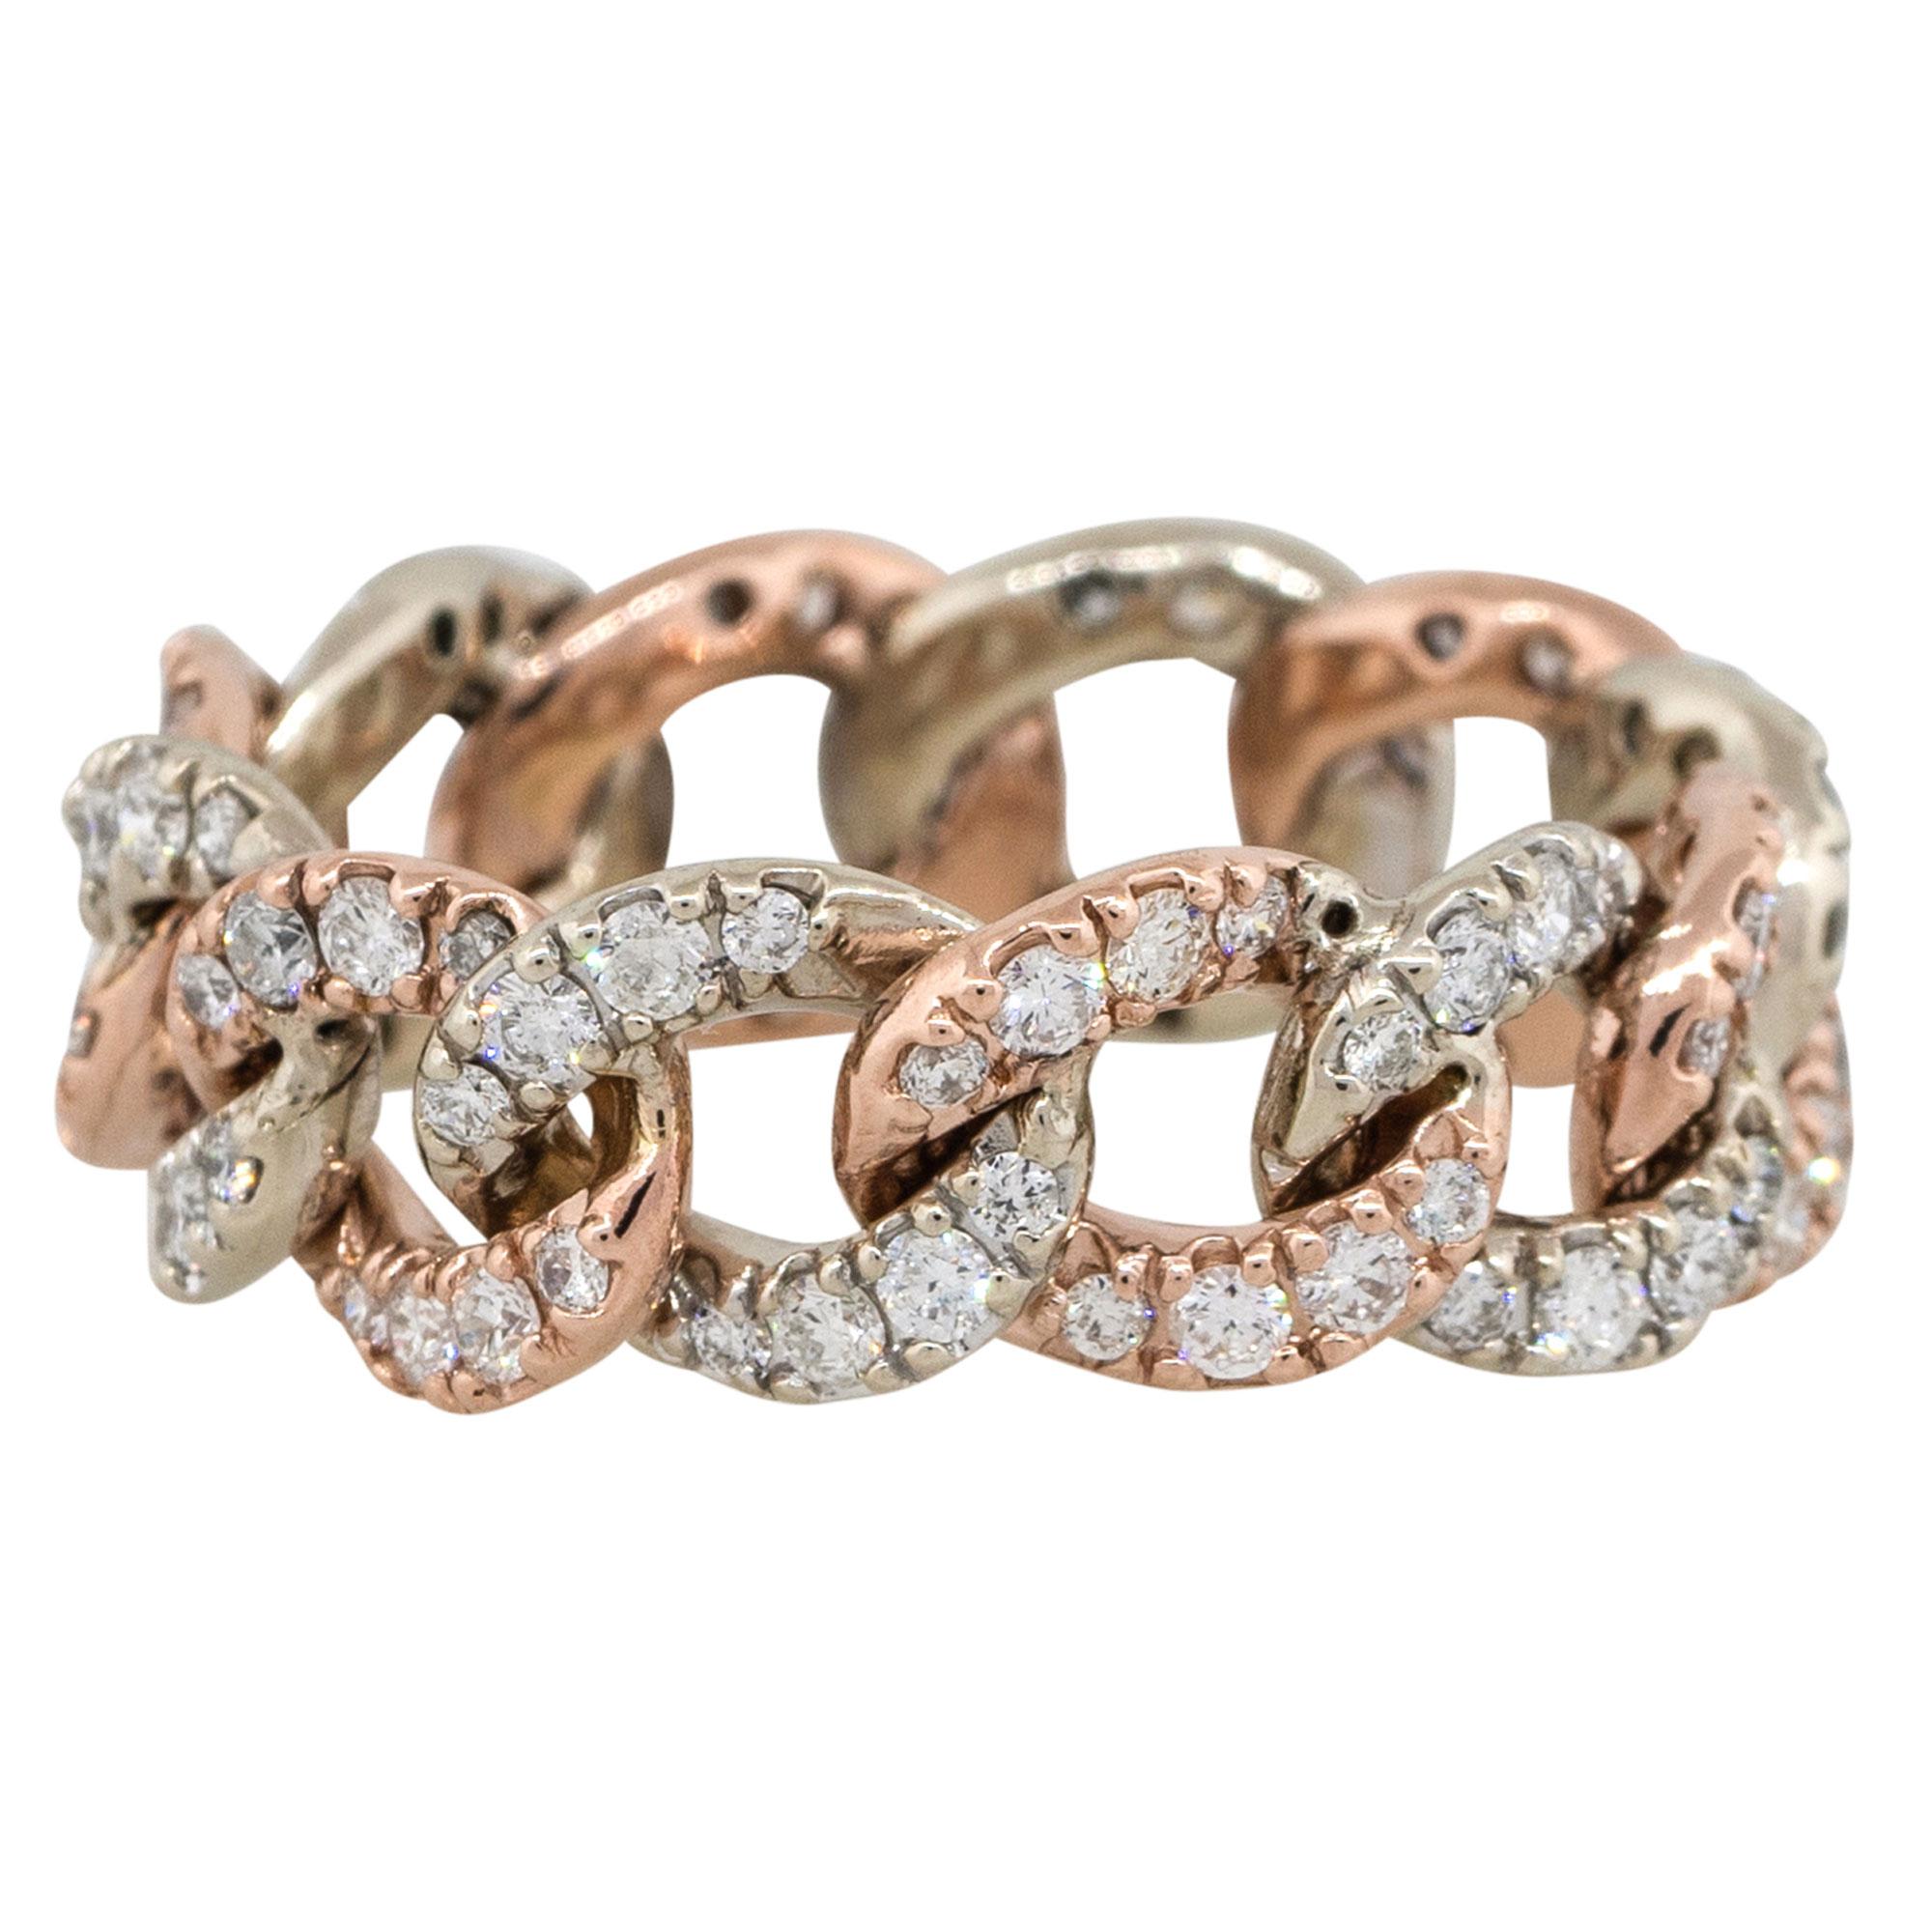 2 Carat Round Diamond Pave Cuban Link Ring 14 Karat In New Condition For Sale In Boca Raton, FL